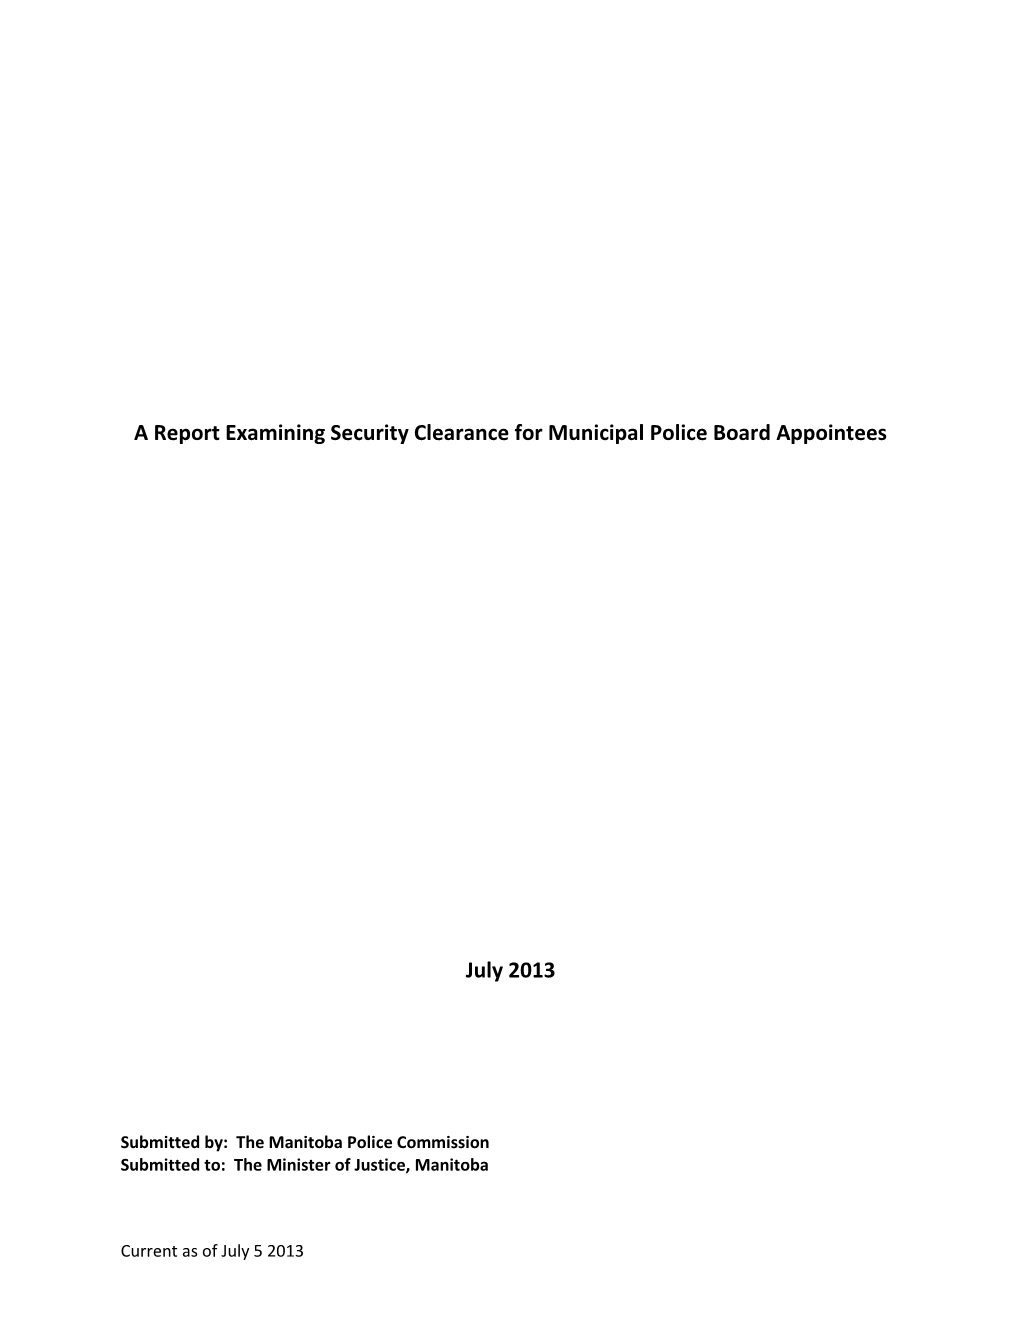 A Report Examining Security Clearance for Municipal Police Board Appointees July 2013